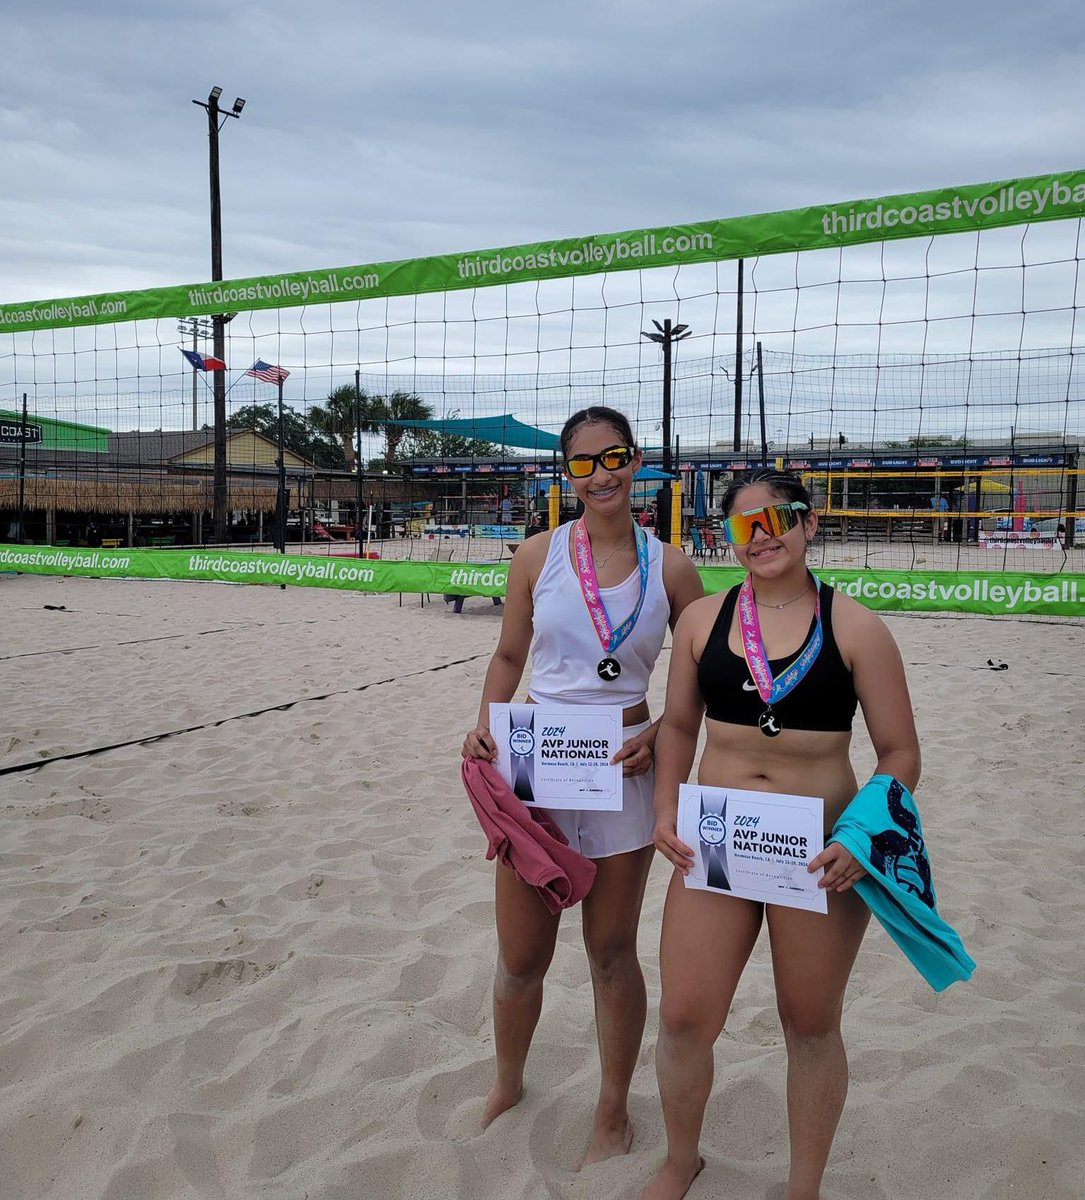 Had fun today playing with Aaryn Brown!! Getting 1st place 🥇 and earning a bid to AVP Junior Nationals! #beachvolleyball #Volleyball #1stplace